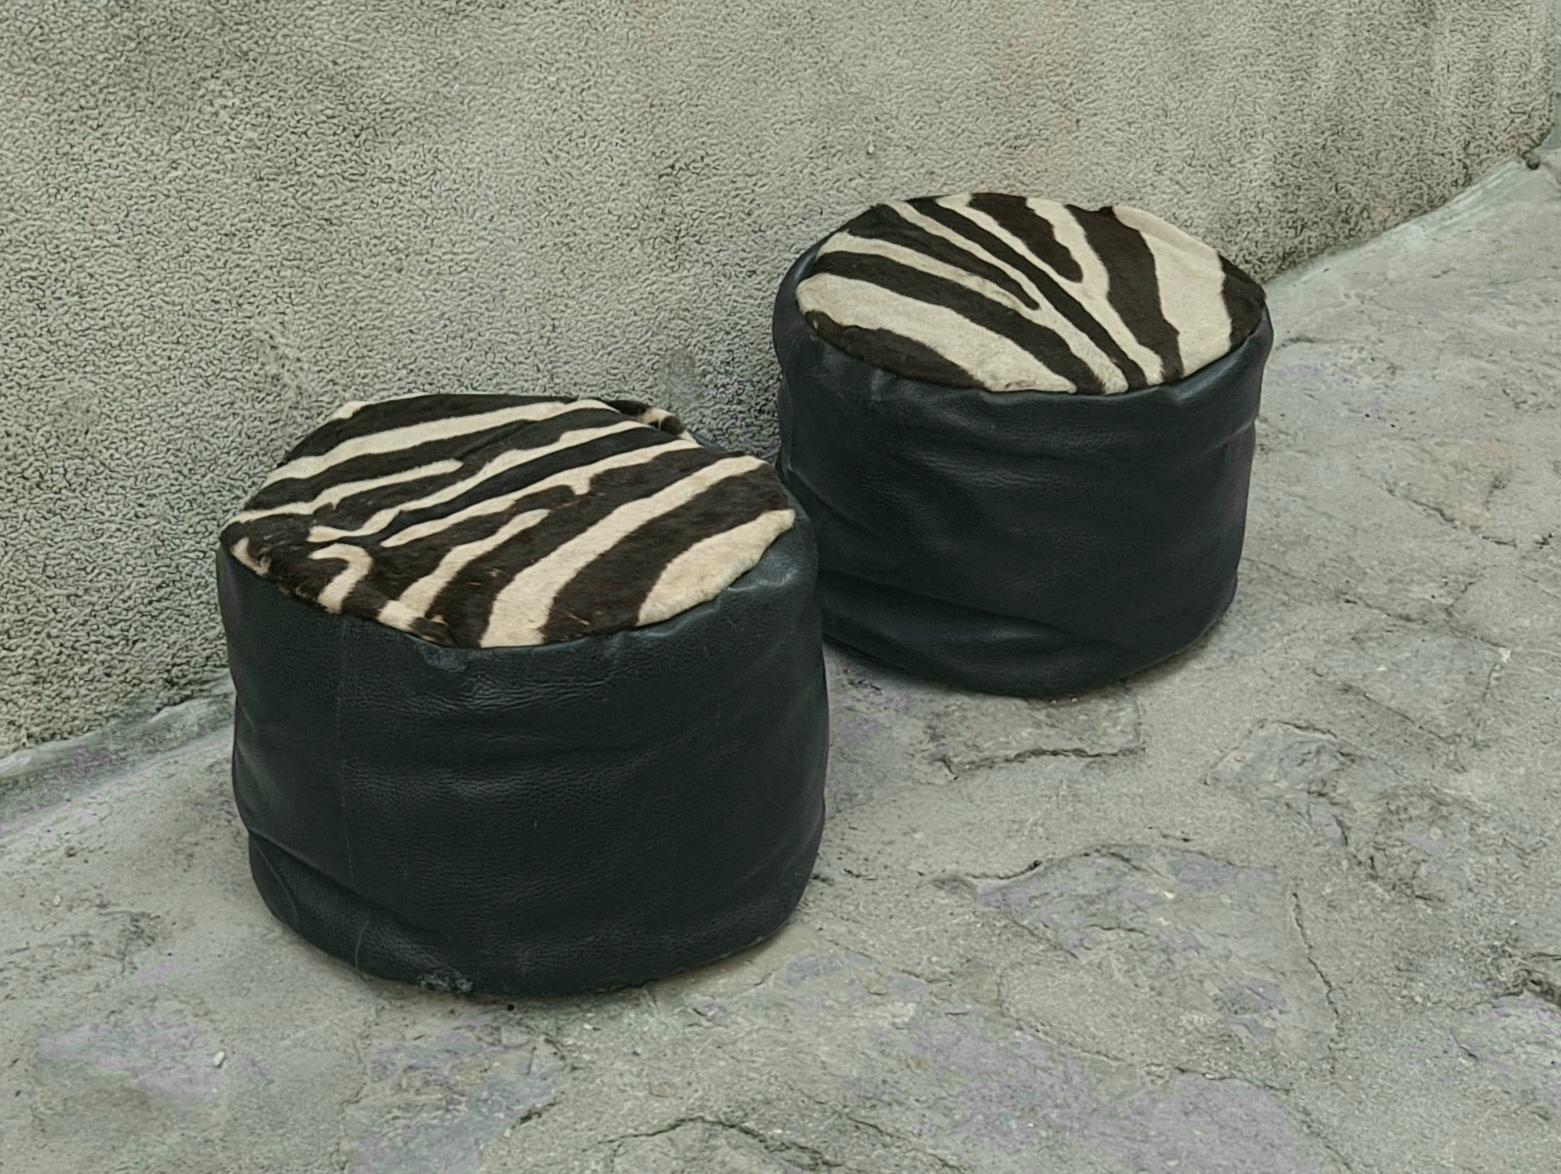 Italian mid century zebra pouf ottomans are hand stitched and made of the original Zebra hide and leather.